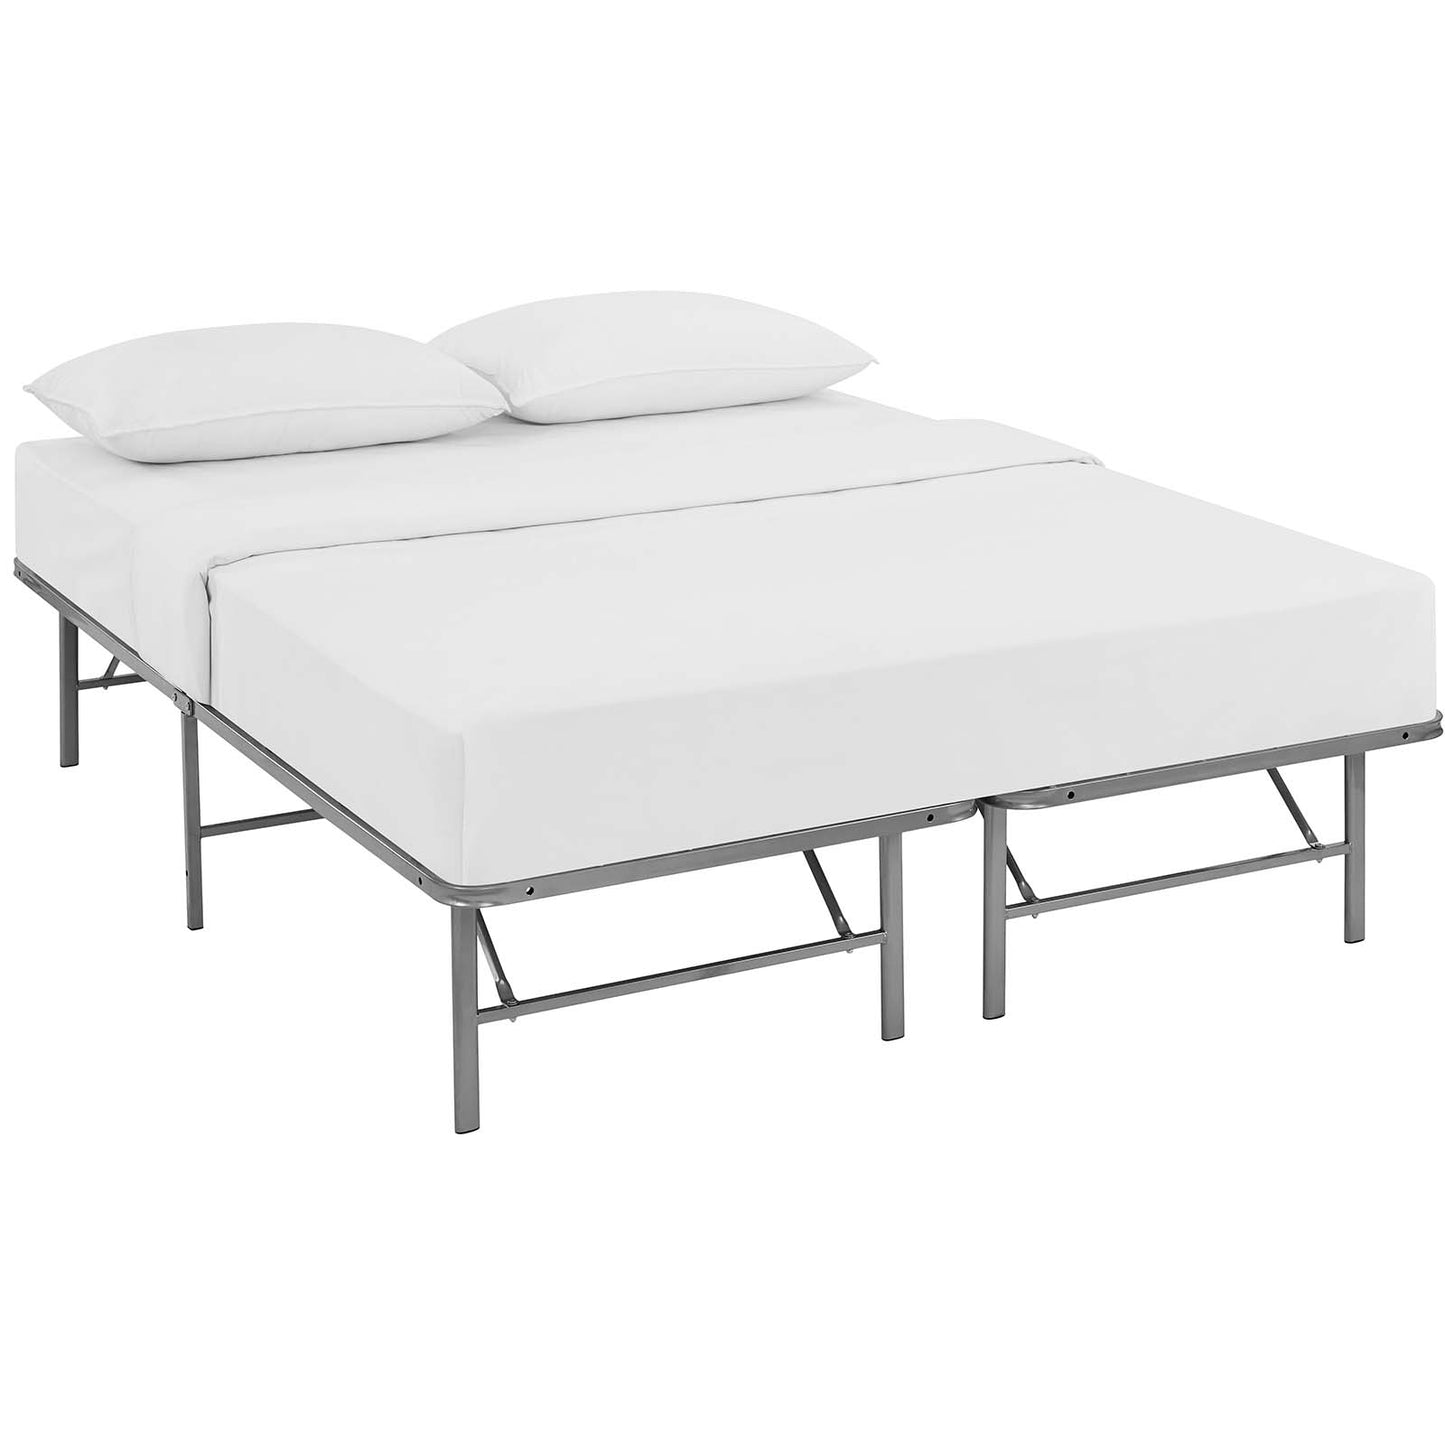 Modway Horizon Queen Stainless Steel Bed Frame - MOD-5429